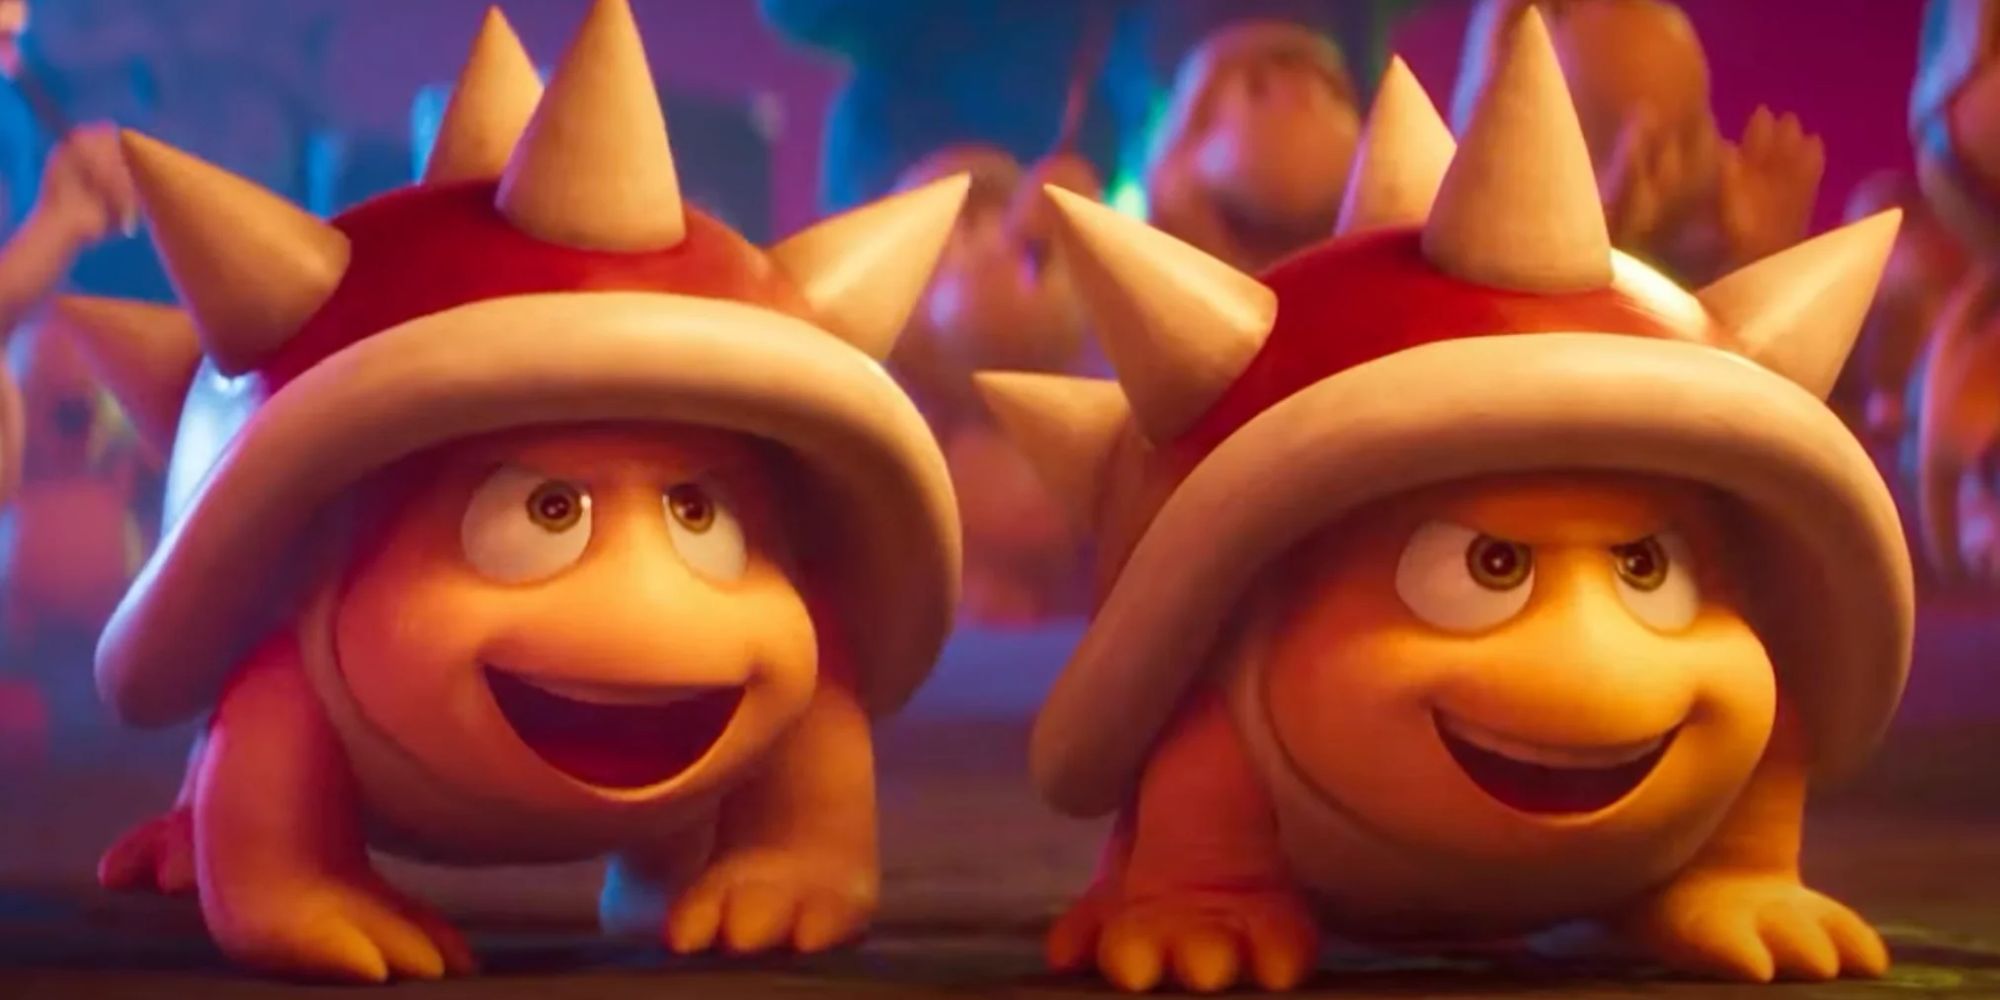 Two Spinies cheering from the Super Mario Bros. Movie